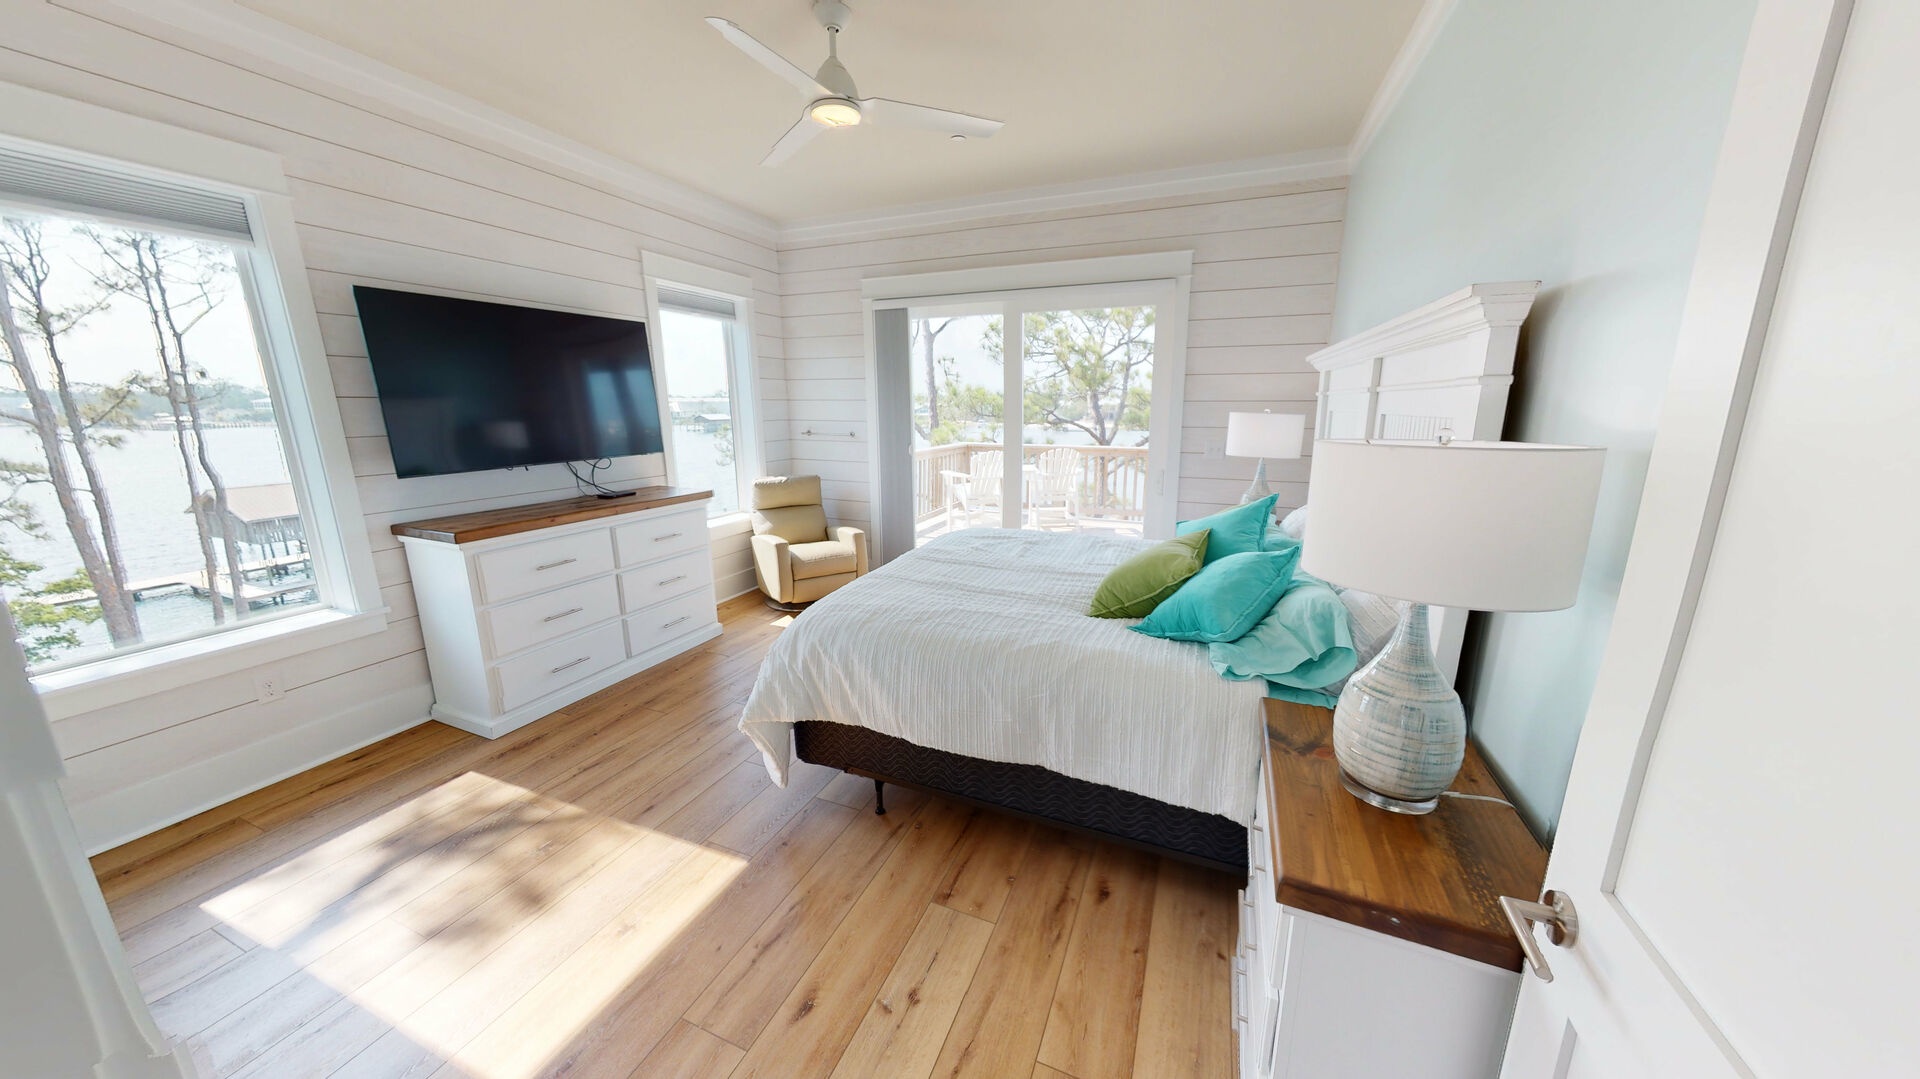 The master bedroom is on the 3rd floor and features a king bed, TV, private bathroom, water views and balcony access